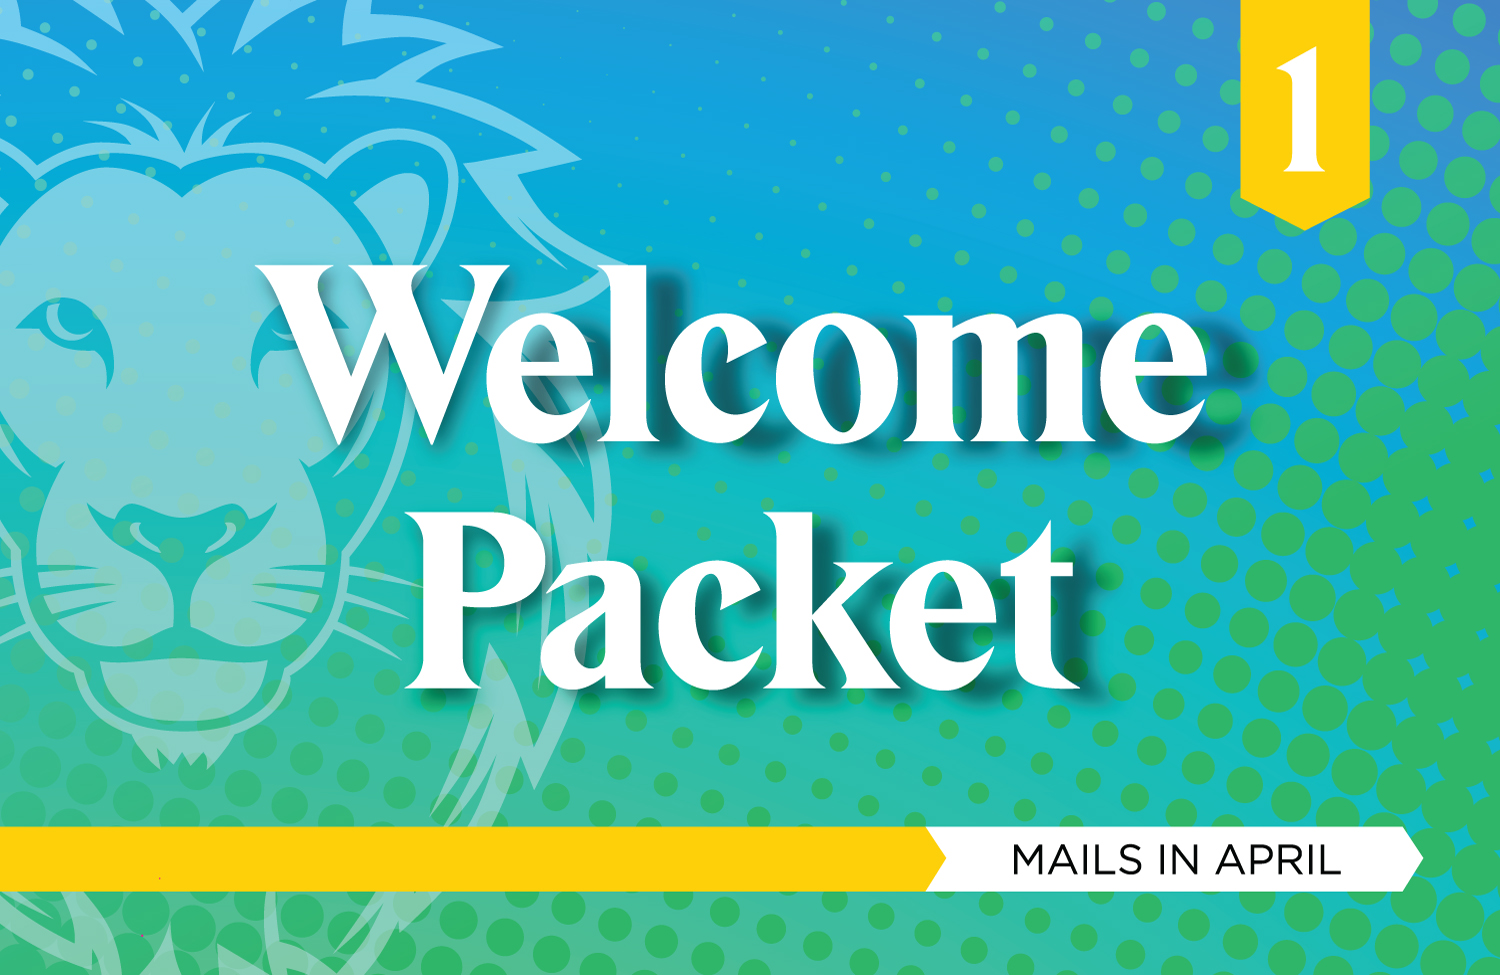 Mailing 1: Welcome Packet, mails in April